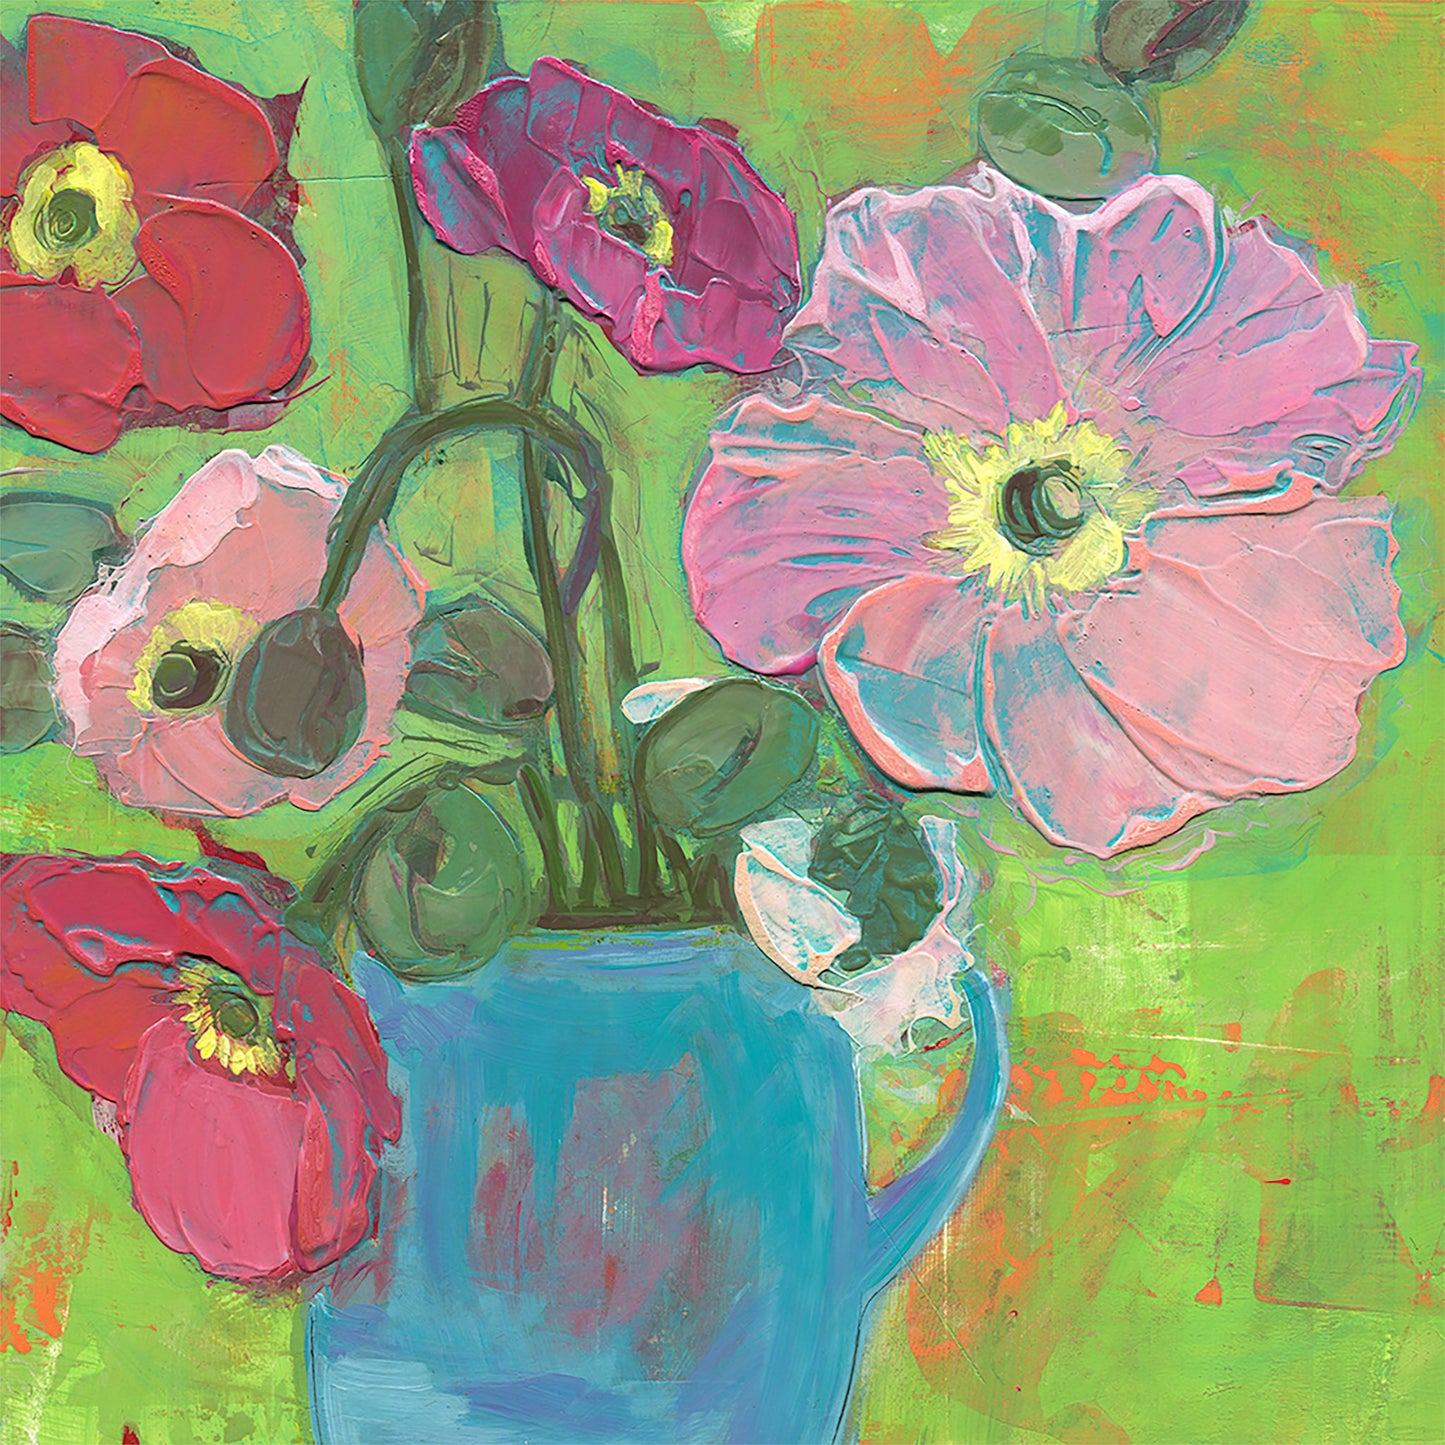 Colorful acrylic painting with heavy texture of poppies in pink, red, and fuchsia in a light blue ceramic cup with drooping poppy buds on a chartreuse green background, with hints of orange peeking through.